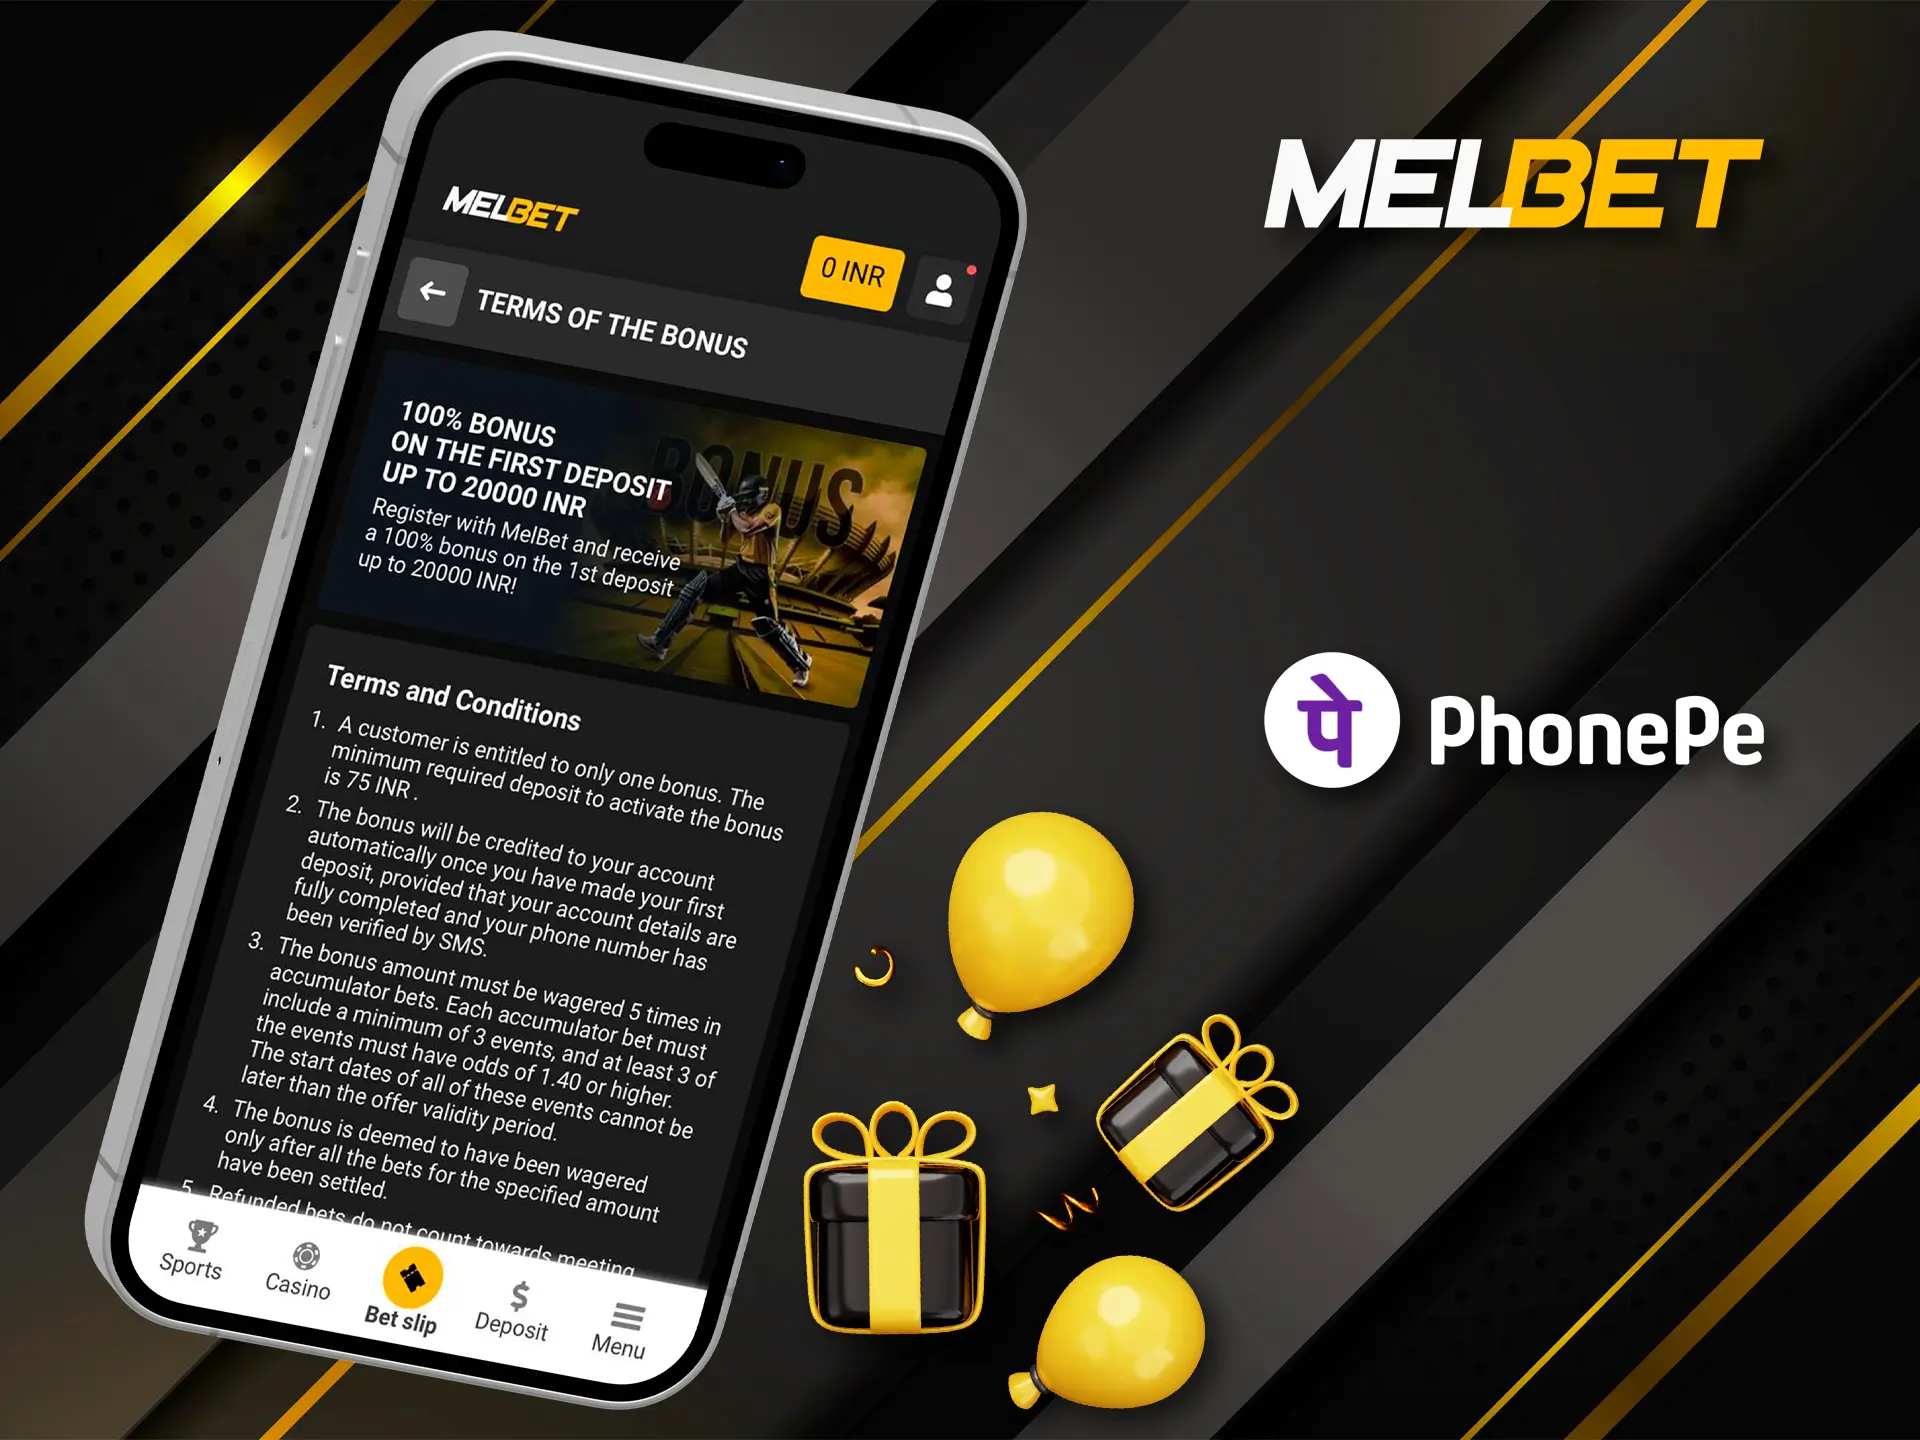 Melbet and their promotions help customers achieve betting success and withdrawals via PhonePe.